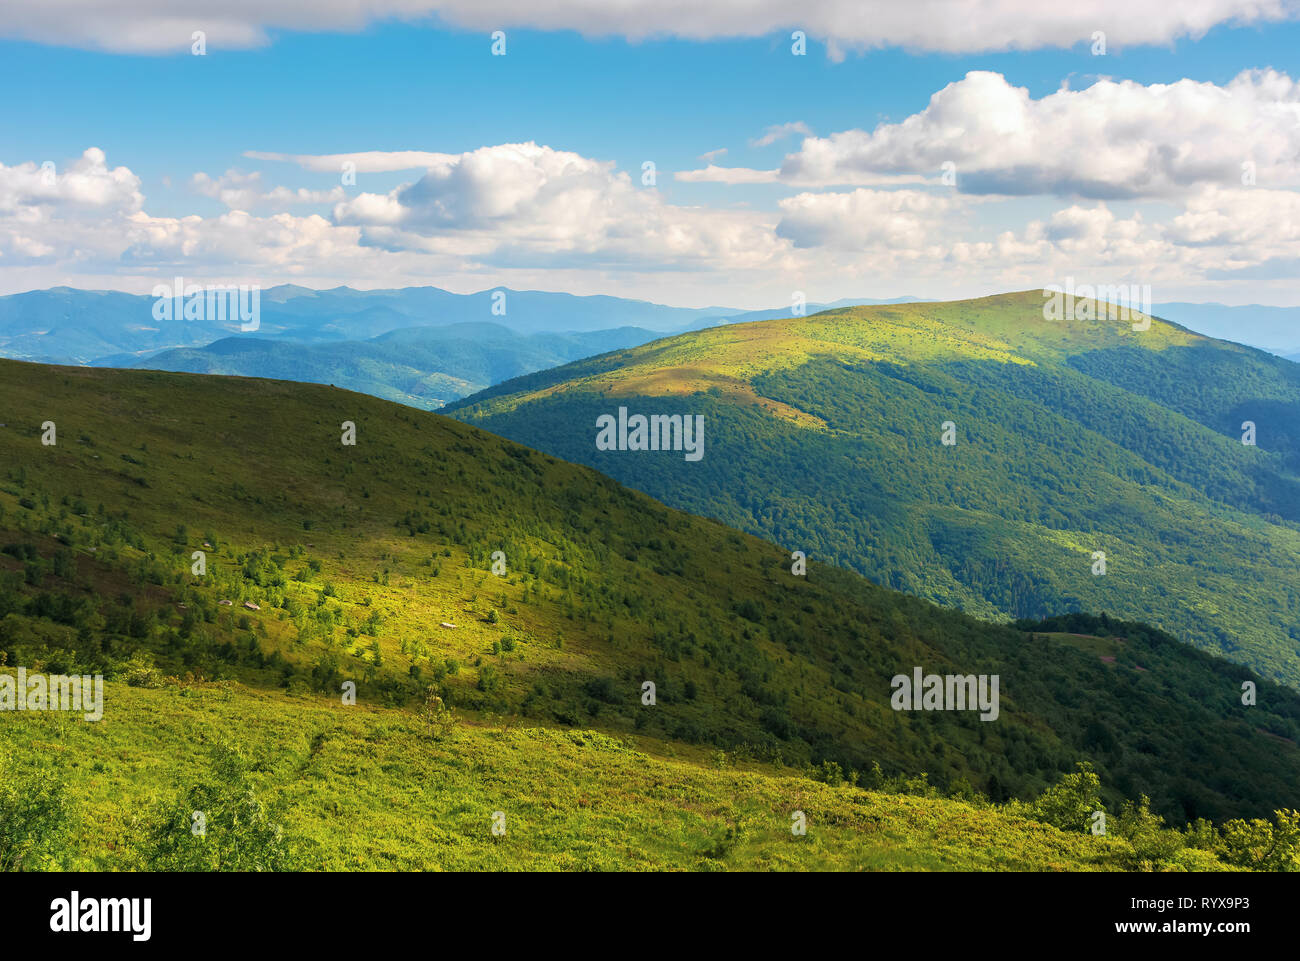 beautiful mountain landscape in summer afternoon. green alpine meadows and forested hills. ridge in the distance. beautiful nature scenery with fluffy Stock Photo